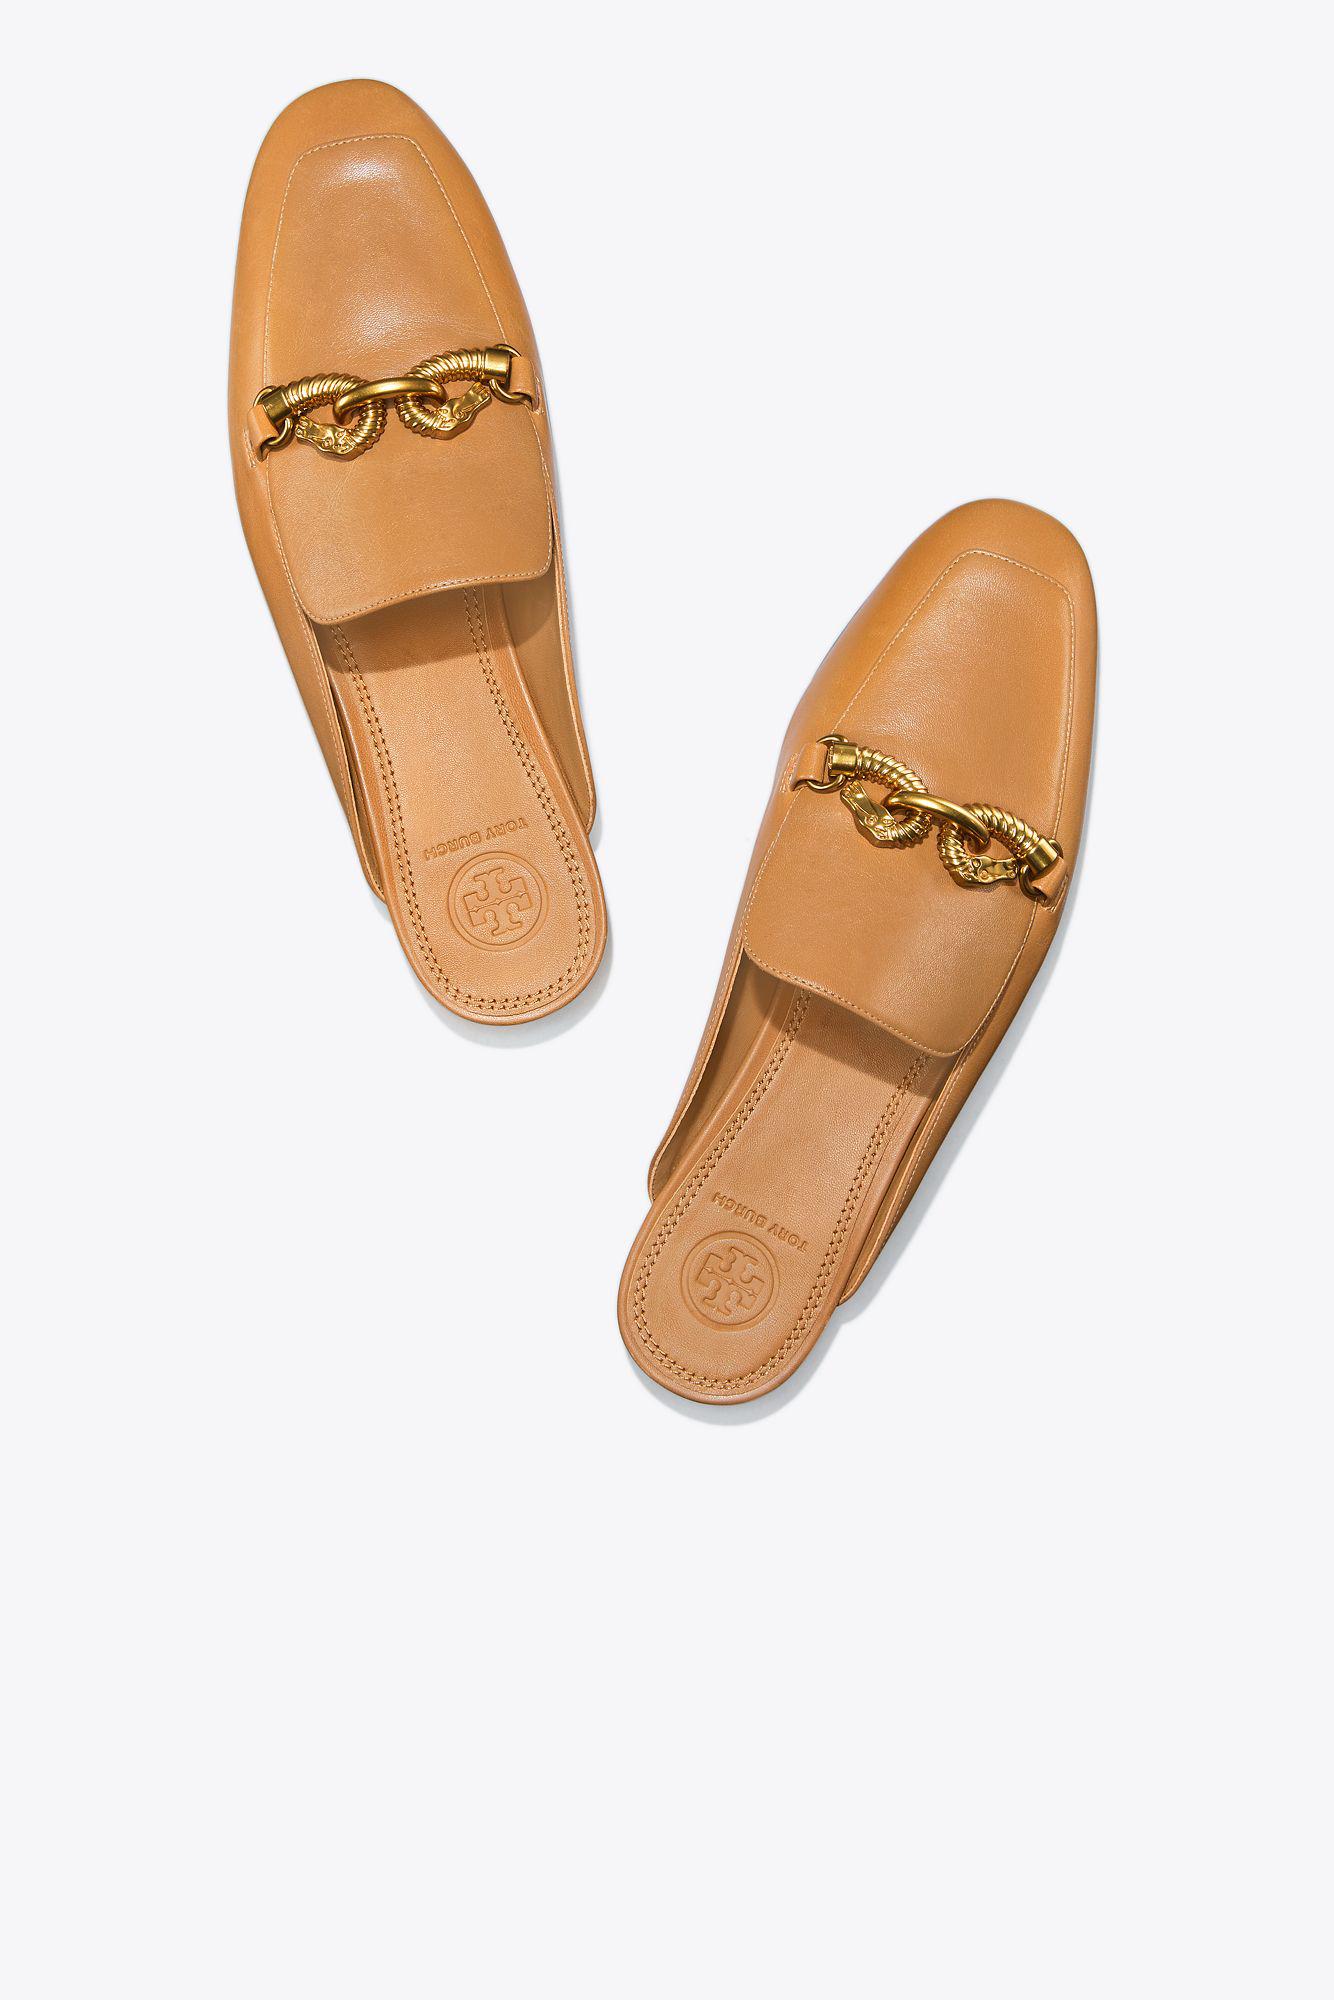 Tory Burch Leather Jessa Backless Loafer - Lyst